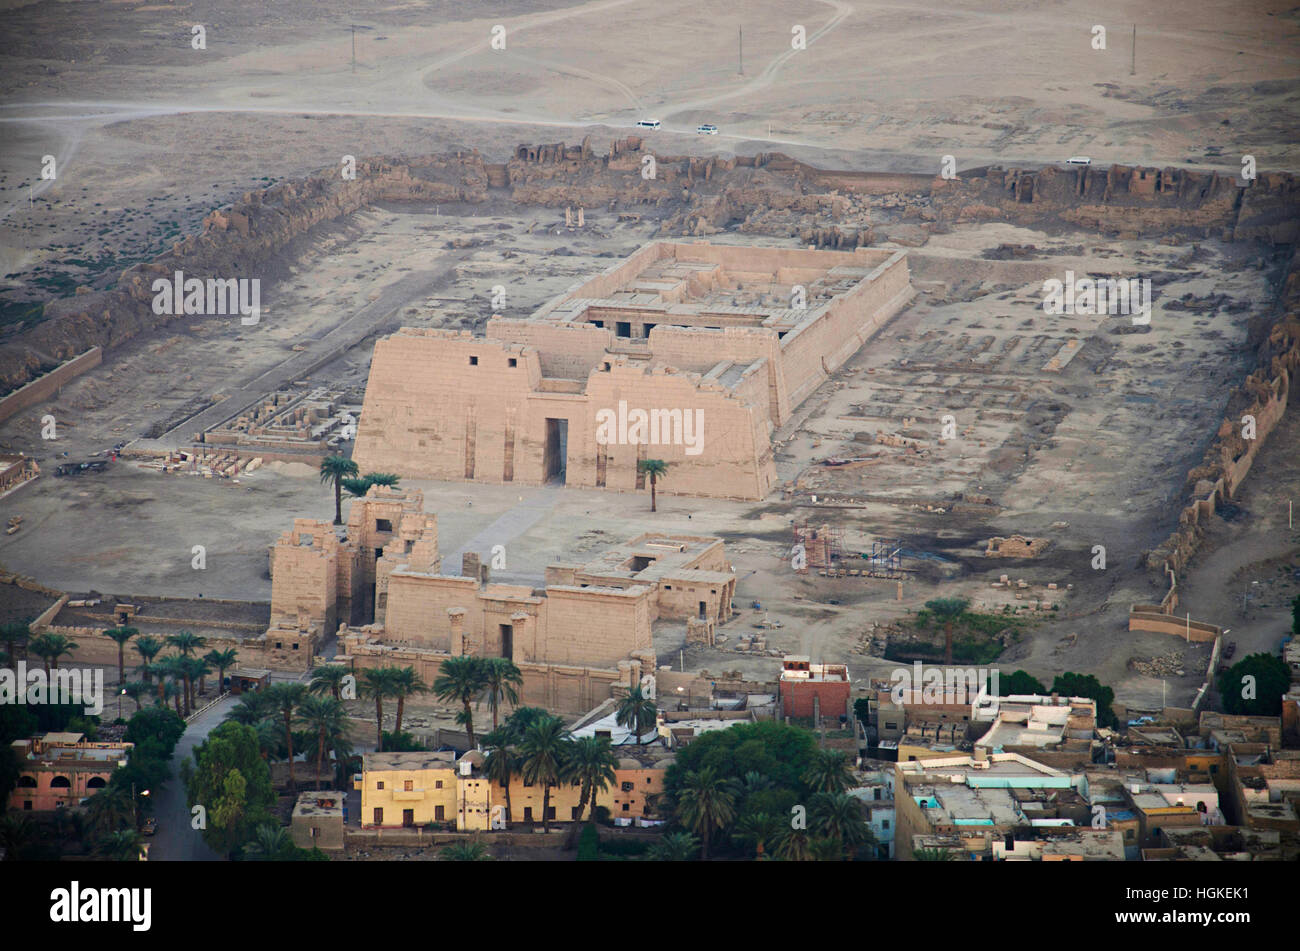 Aerial view of Luxor city and the temple of Habu for Ramses the third, Medinet Habu, Luxor, Egypt Stock Photo